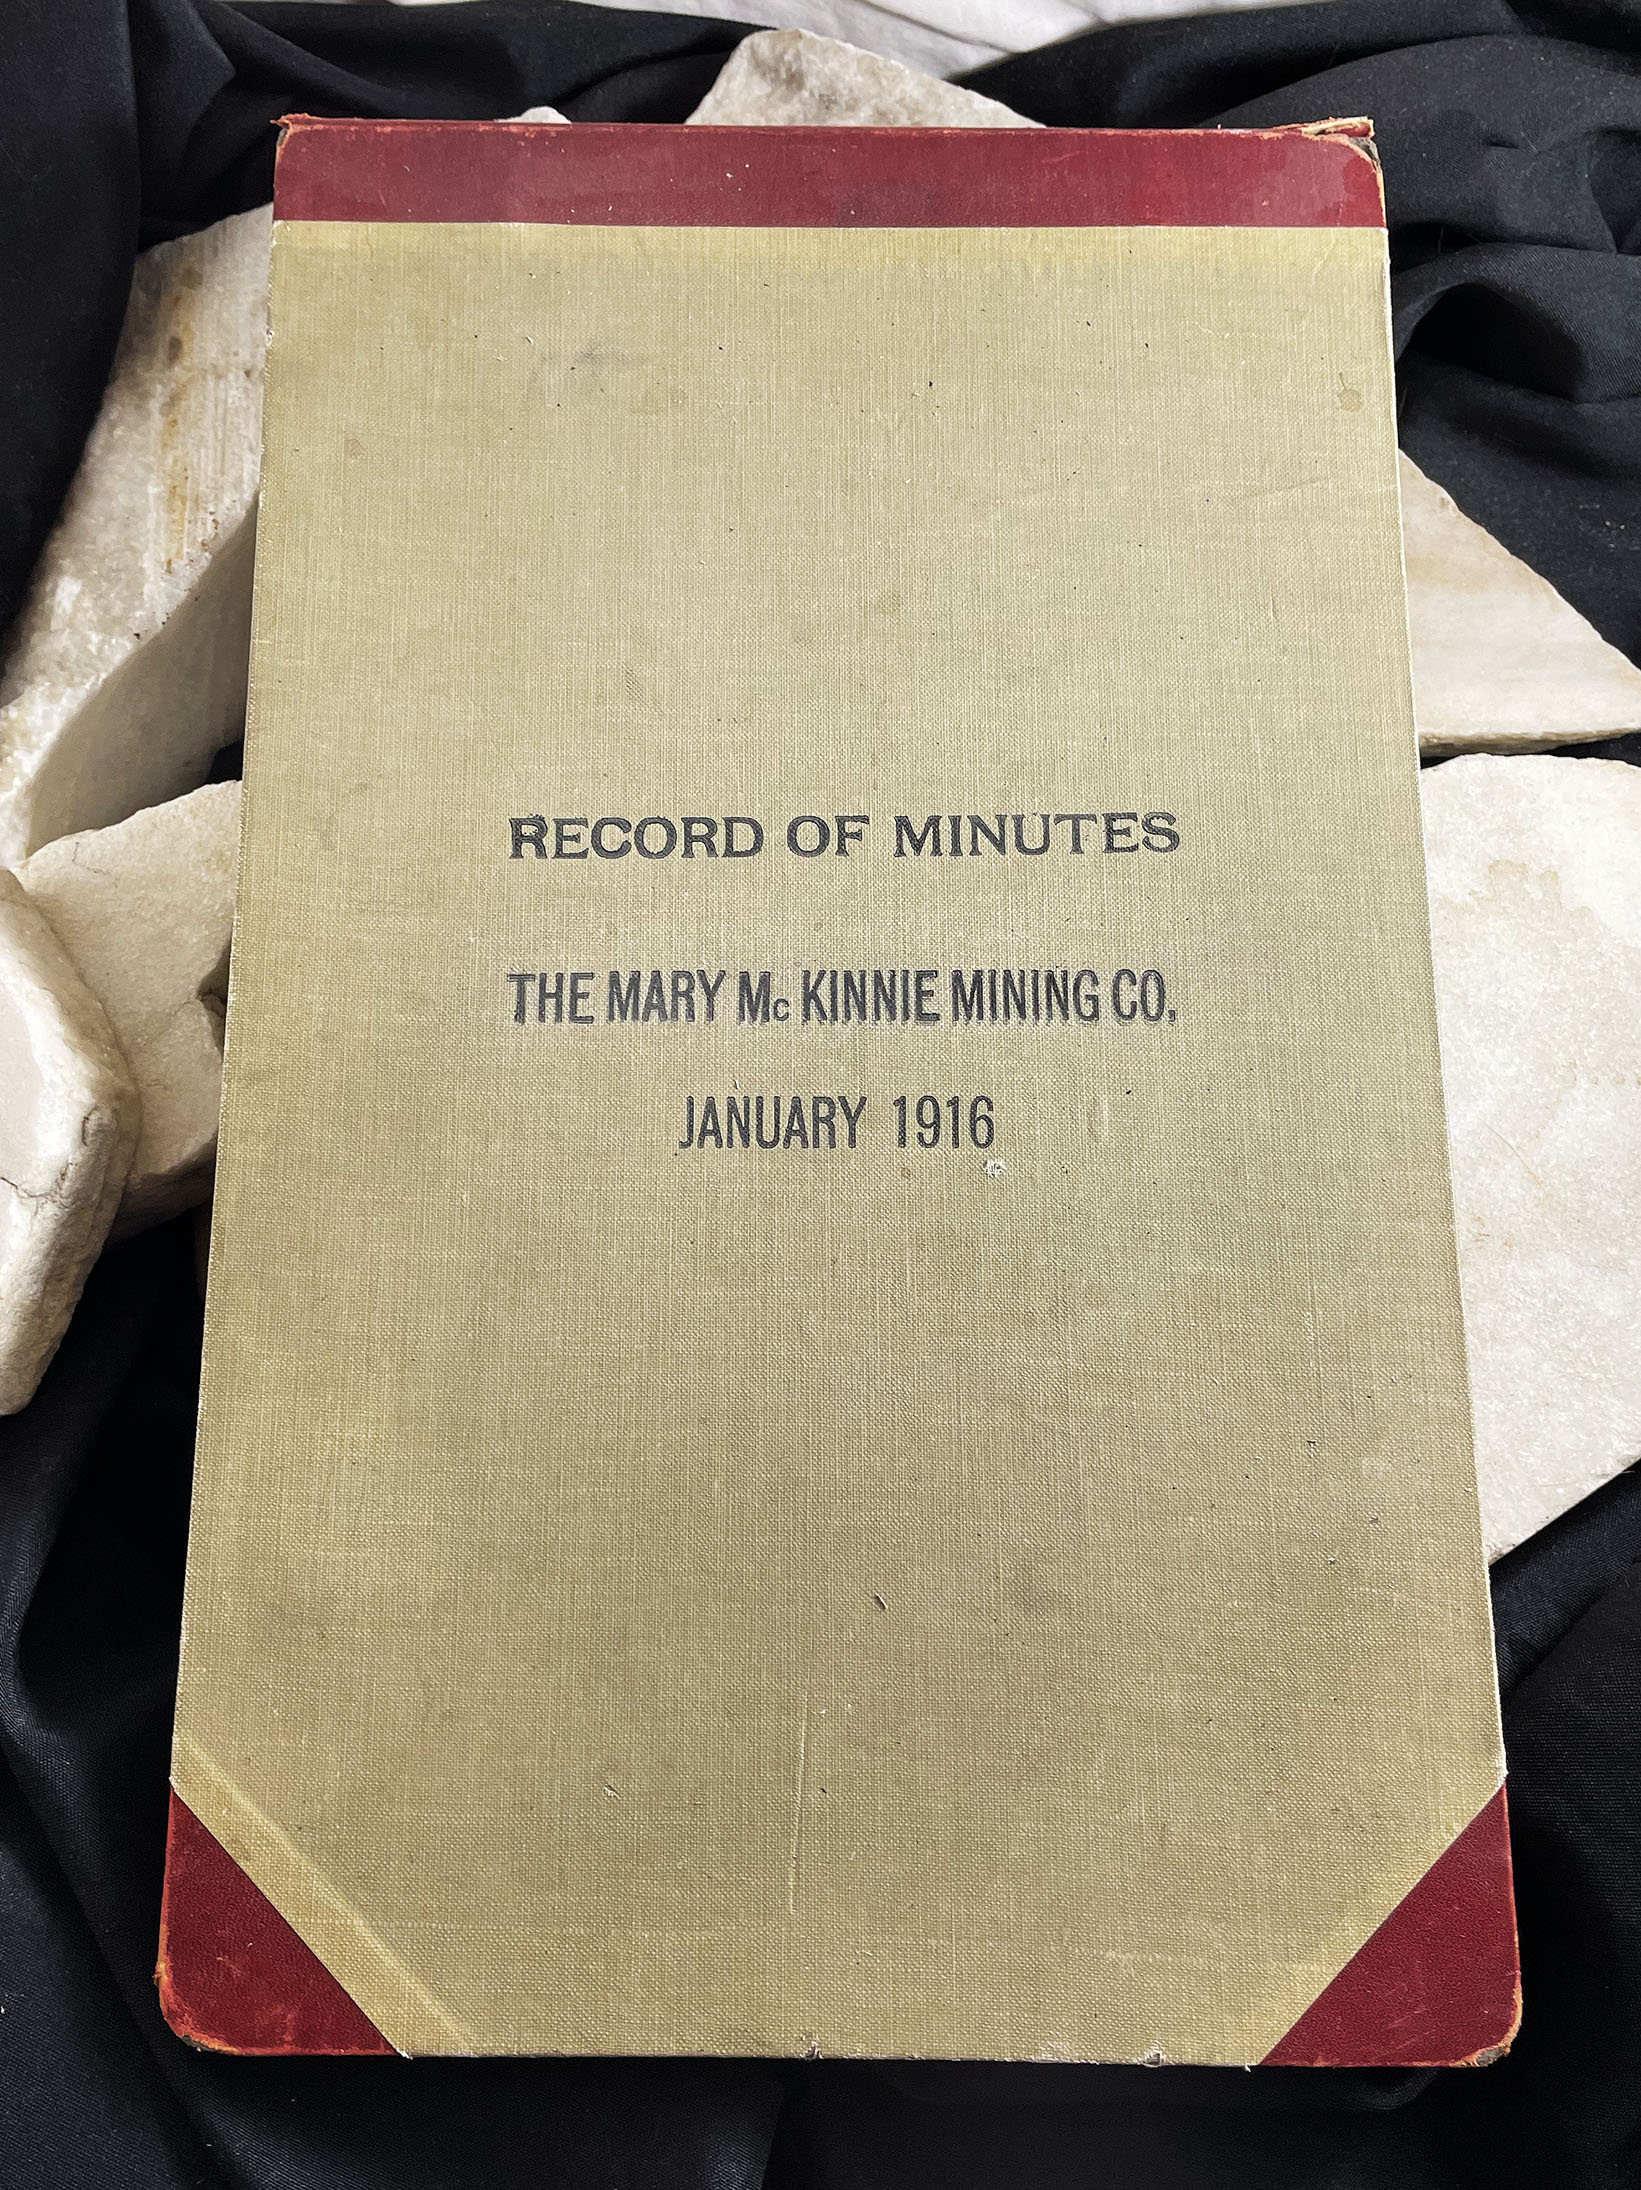 RECORD OF MINUTES OF THE MARY McKINNEY MINING COMPANY ledger Cripple Creek Gold District COLORADO 1916